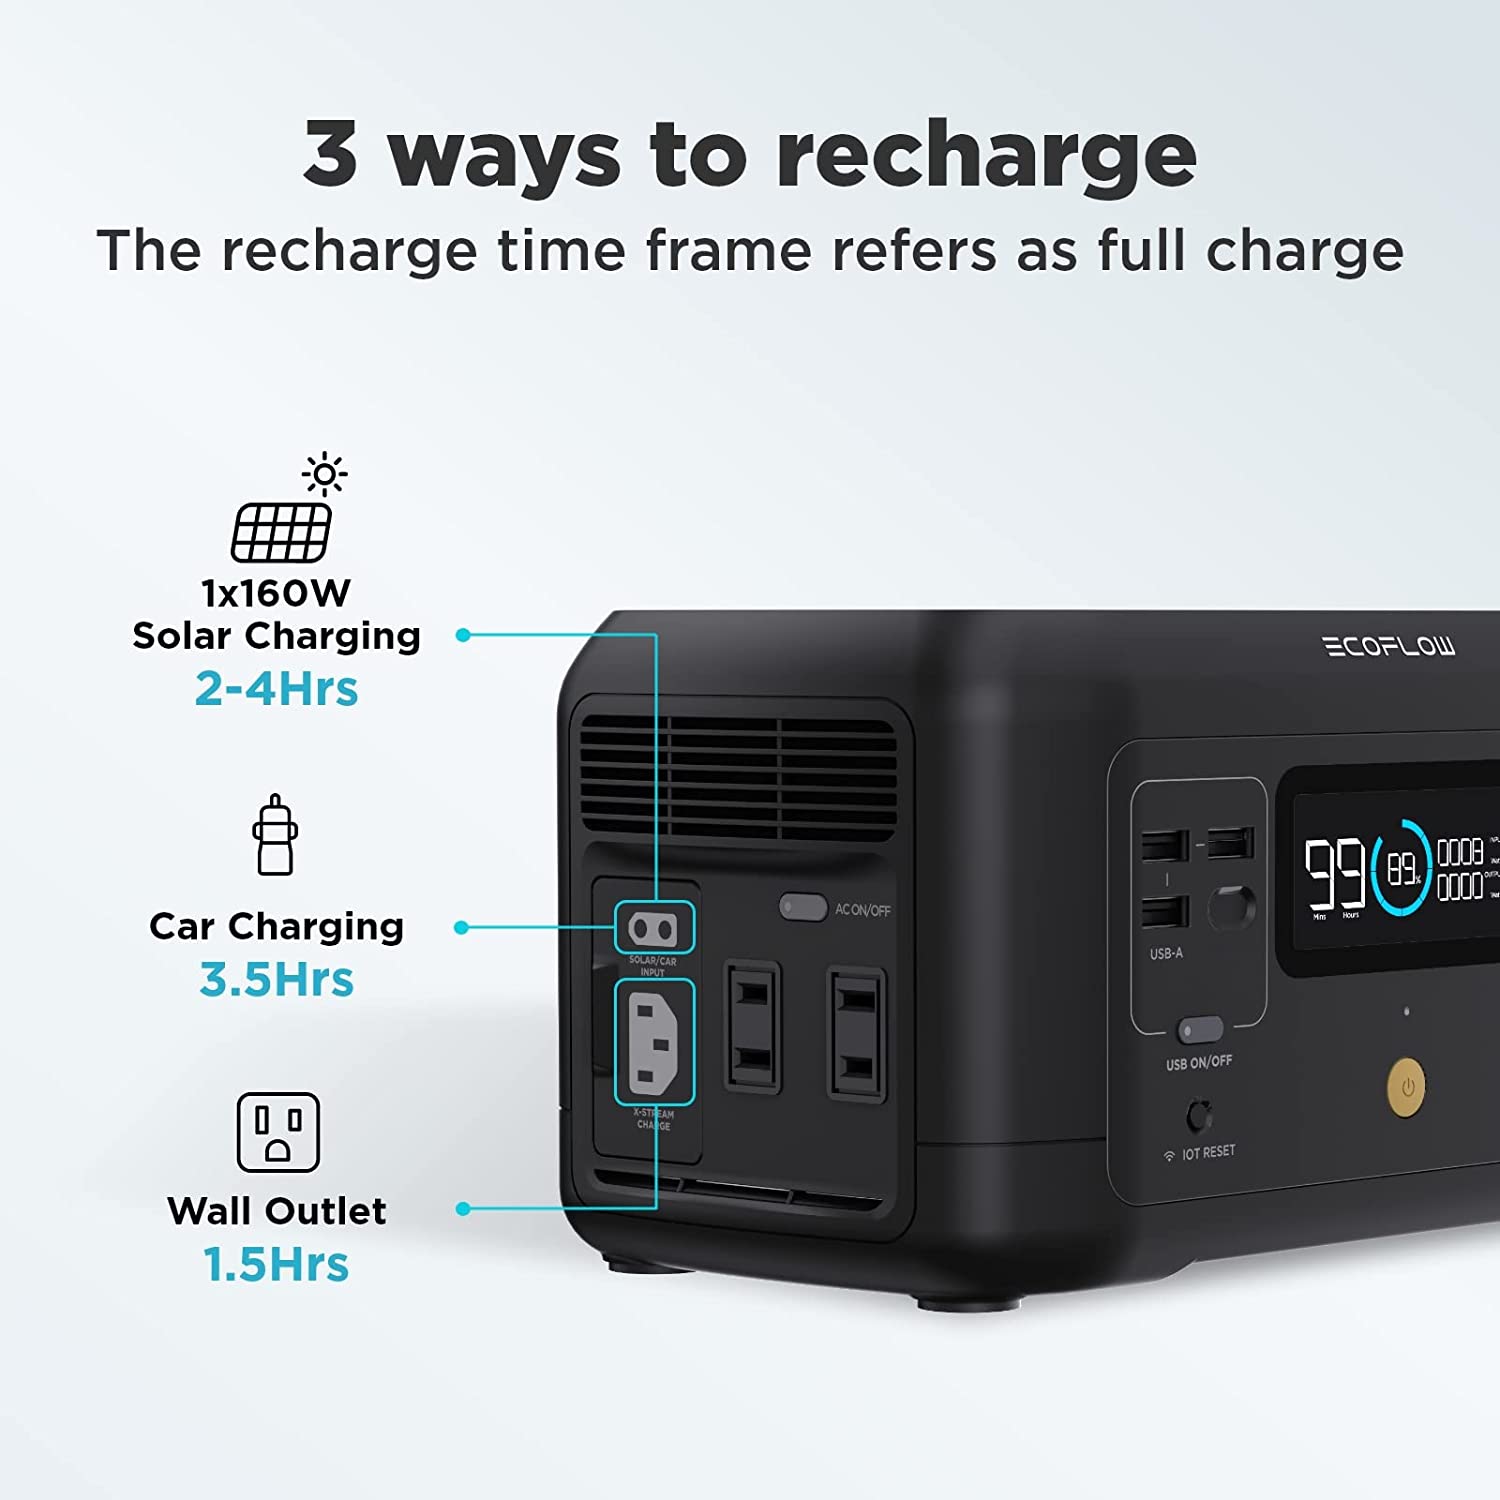 3 ways to recharge The recharge time frame refers as full charge 